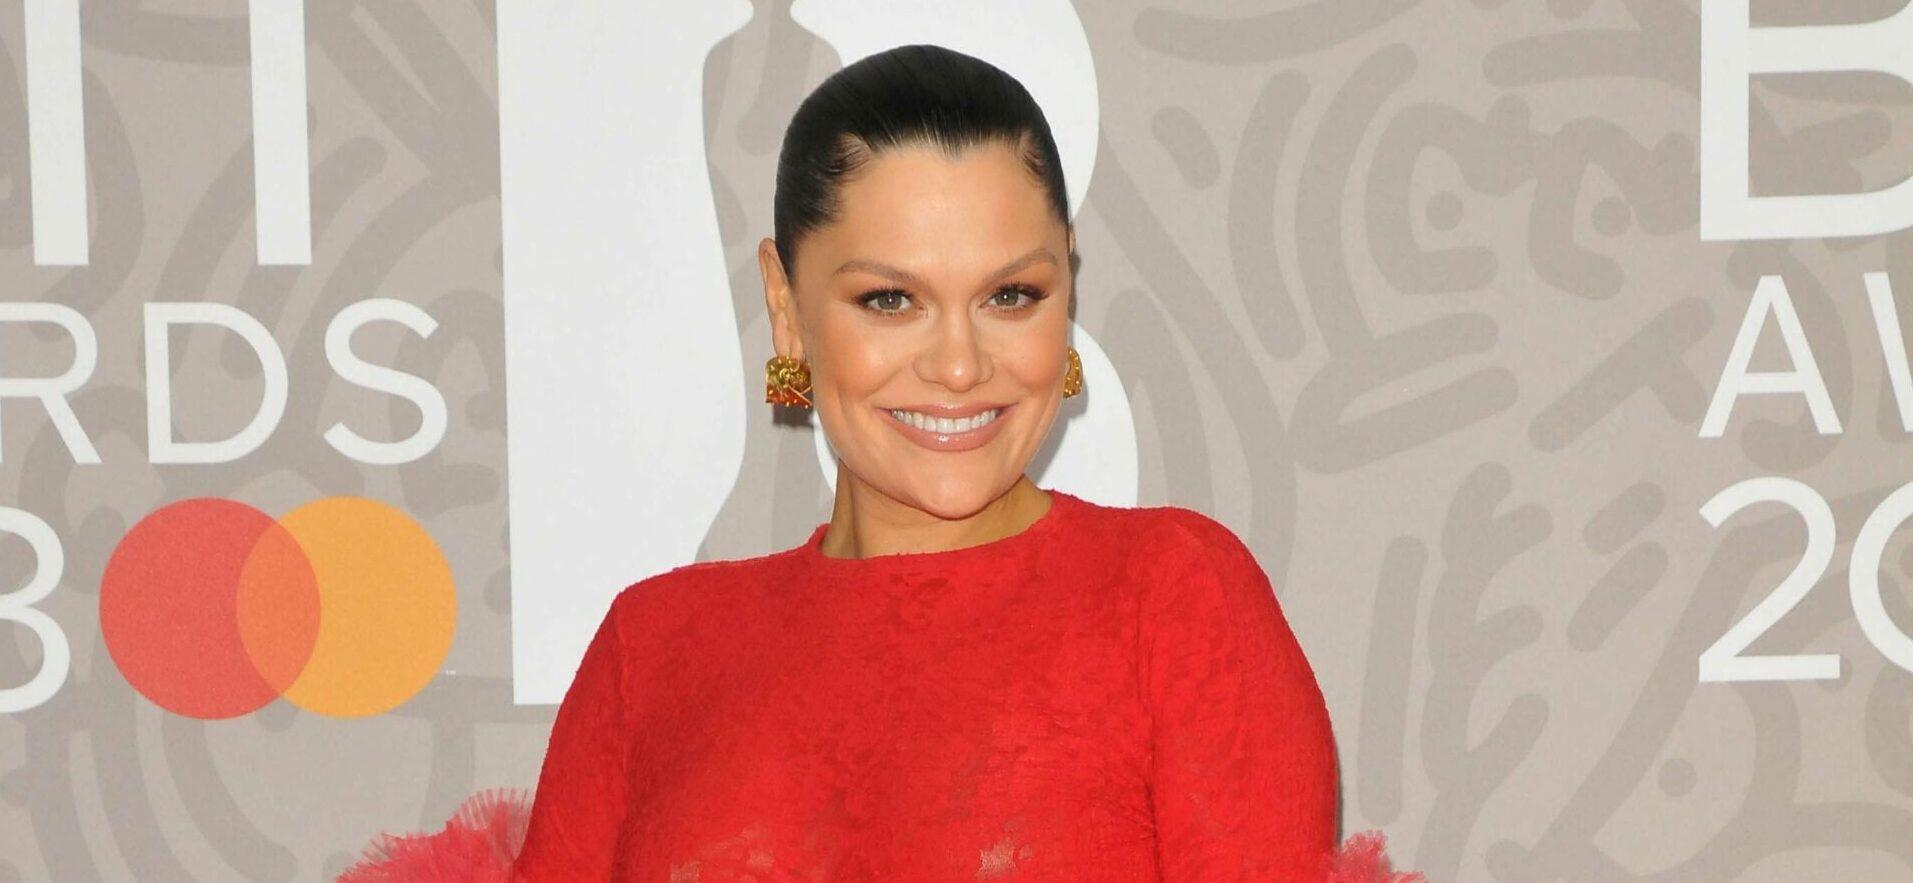 Jessie J Reveals Caring For Her Newborn Has Left Her More ‘Tired’ Than Ever And Feeling ‘Delusional’